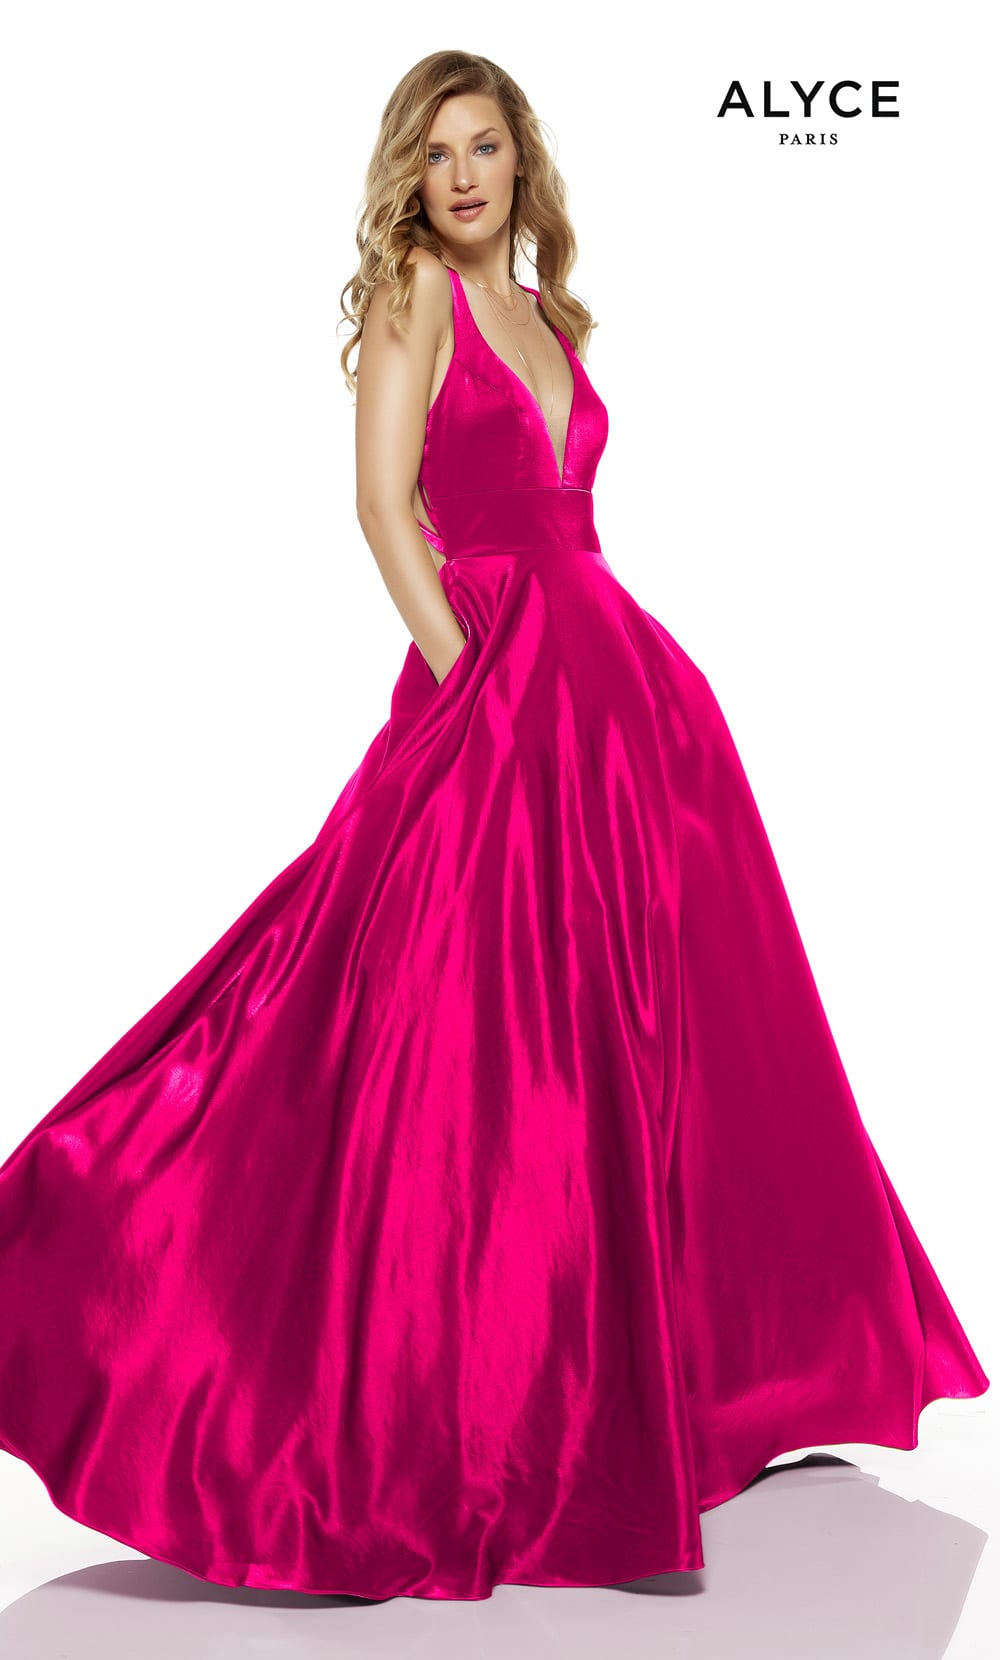 Hot Pink Gown